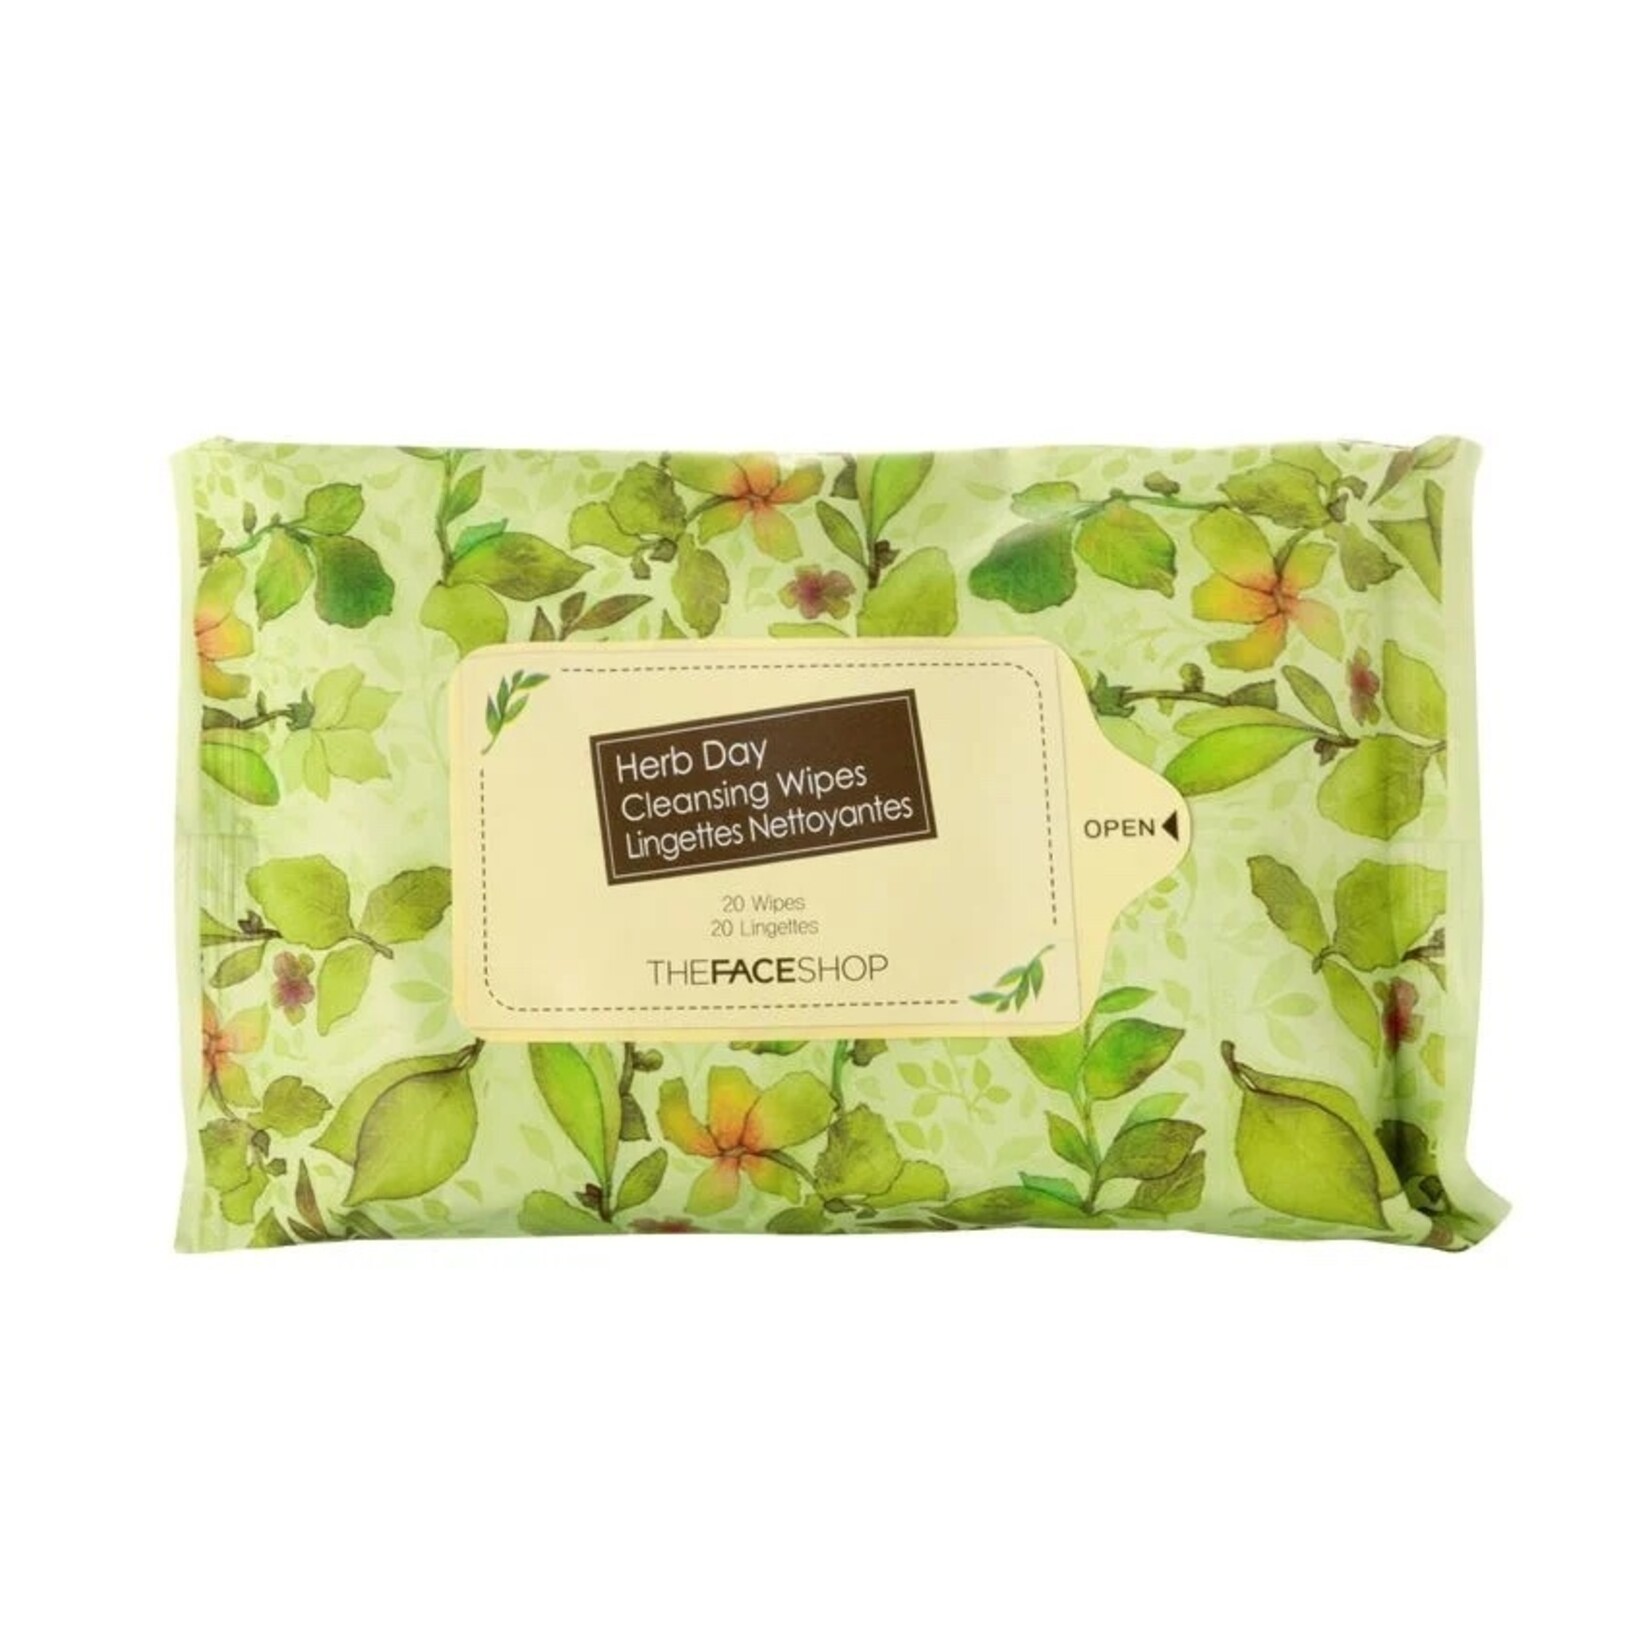 THE FACE SHOP Herb Day Cleansing Tissue 20 Sheets